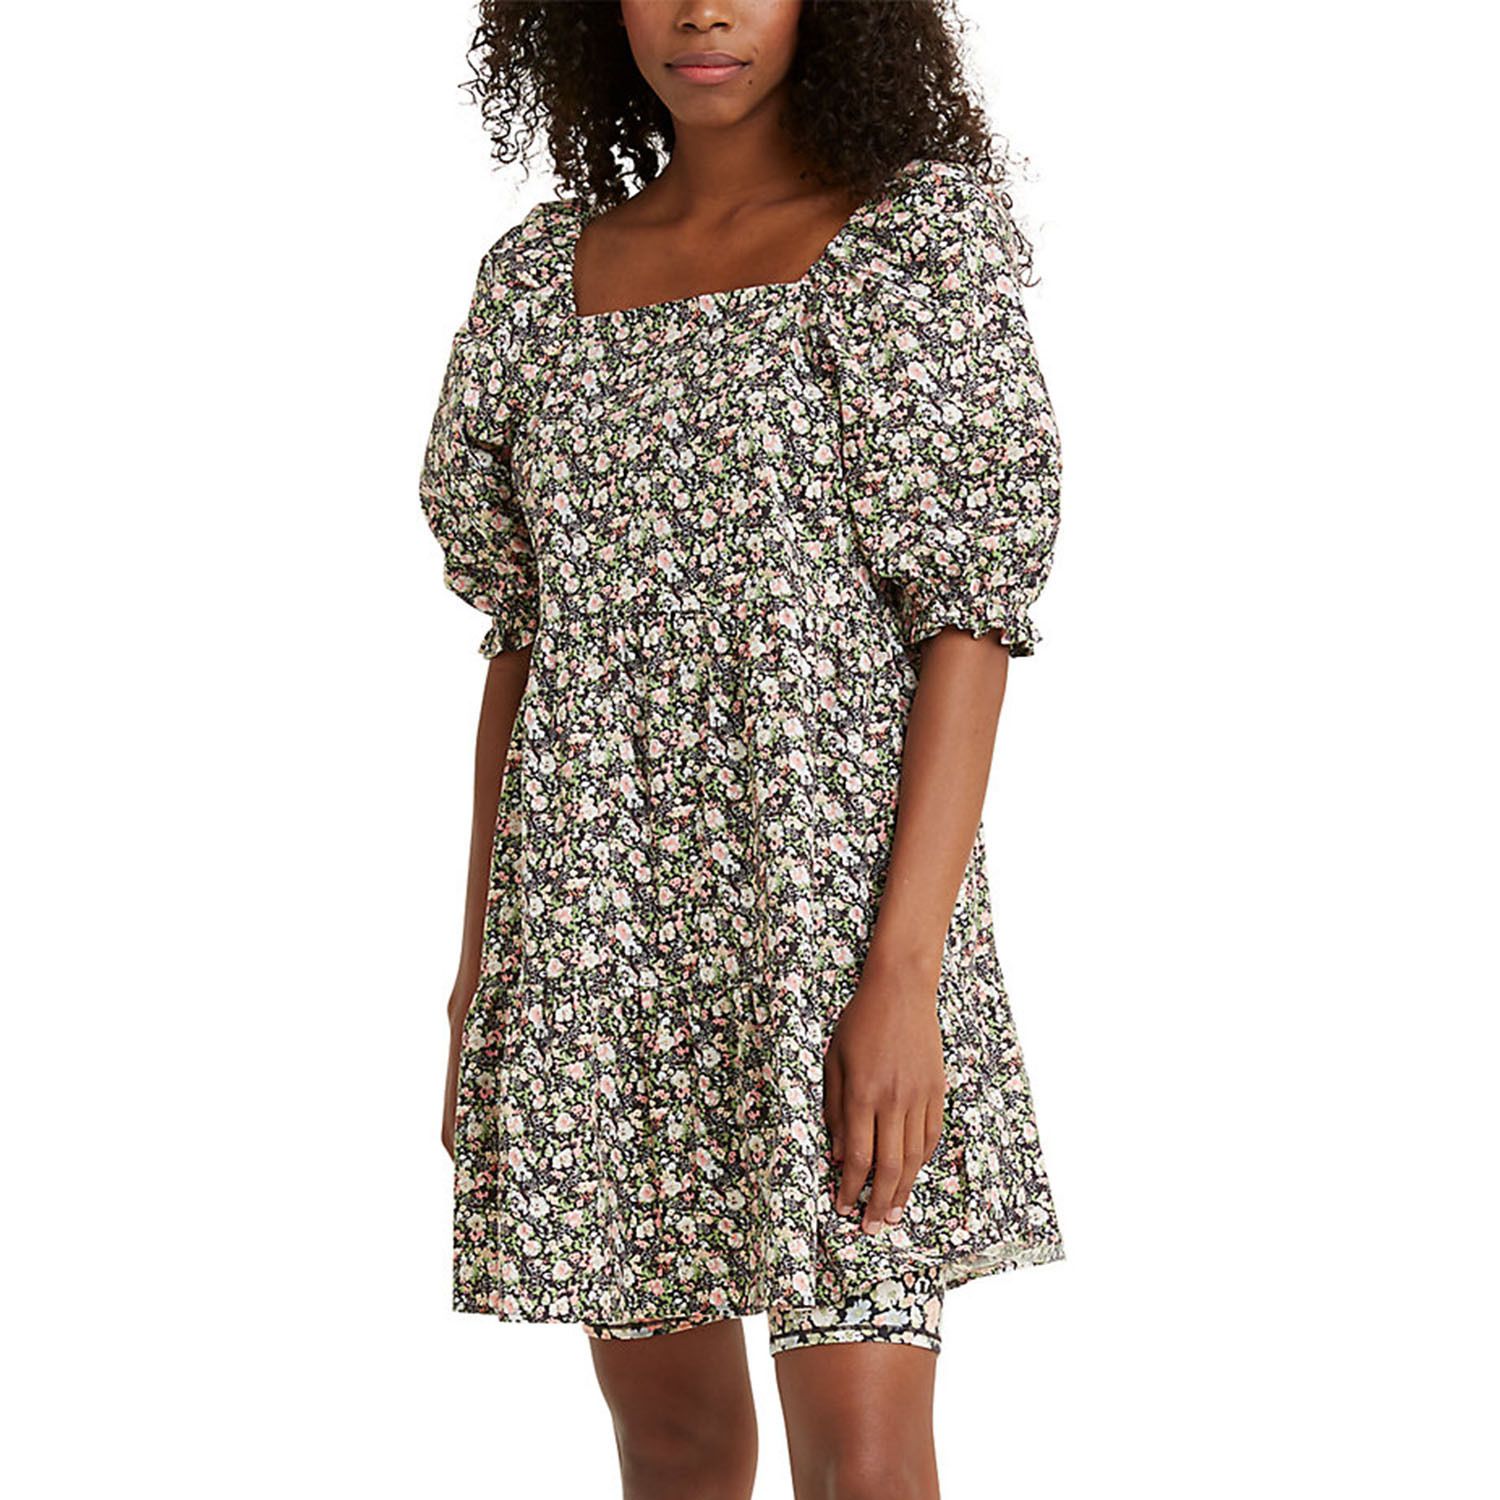 Image for Levi's Women's Willa Trapeze Dress at Kohl's.